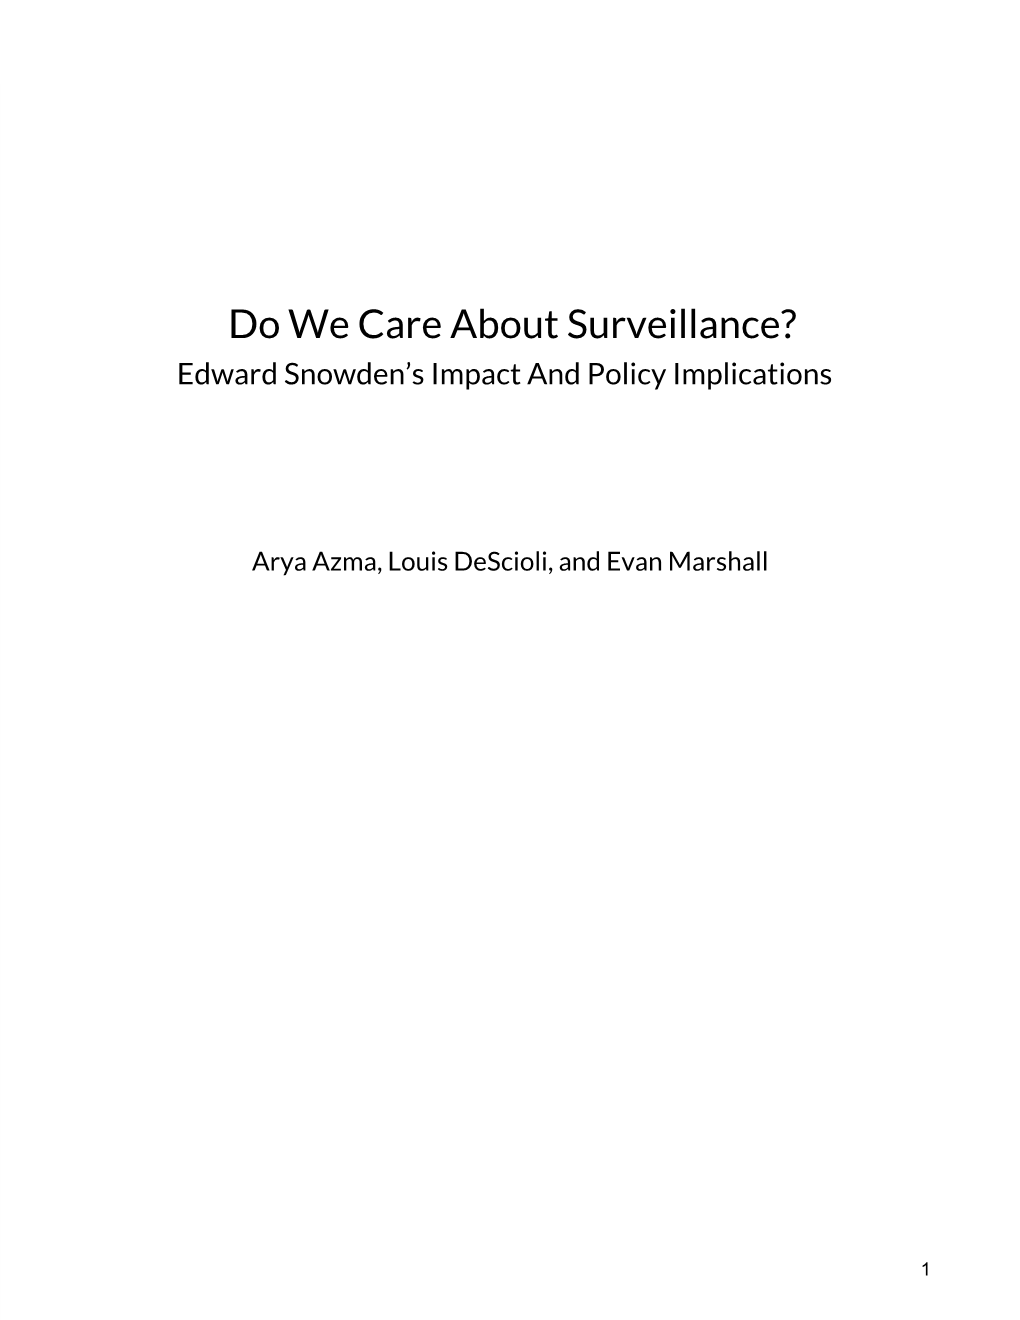 Do We Care About Surveillance? Edward Snowden’S Impact and Policy Implications